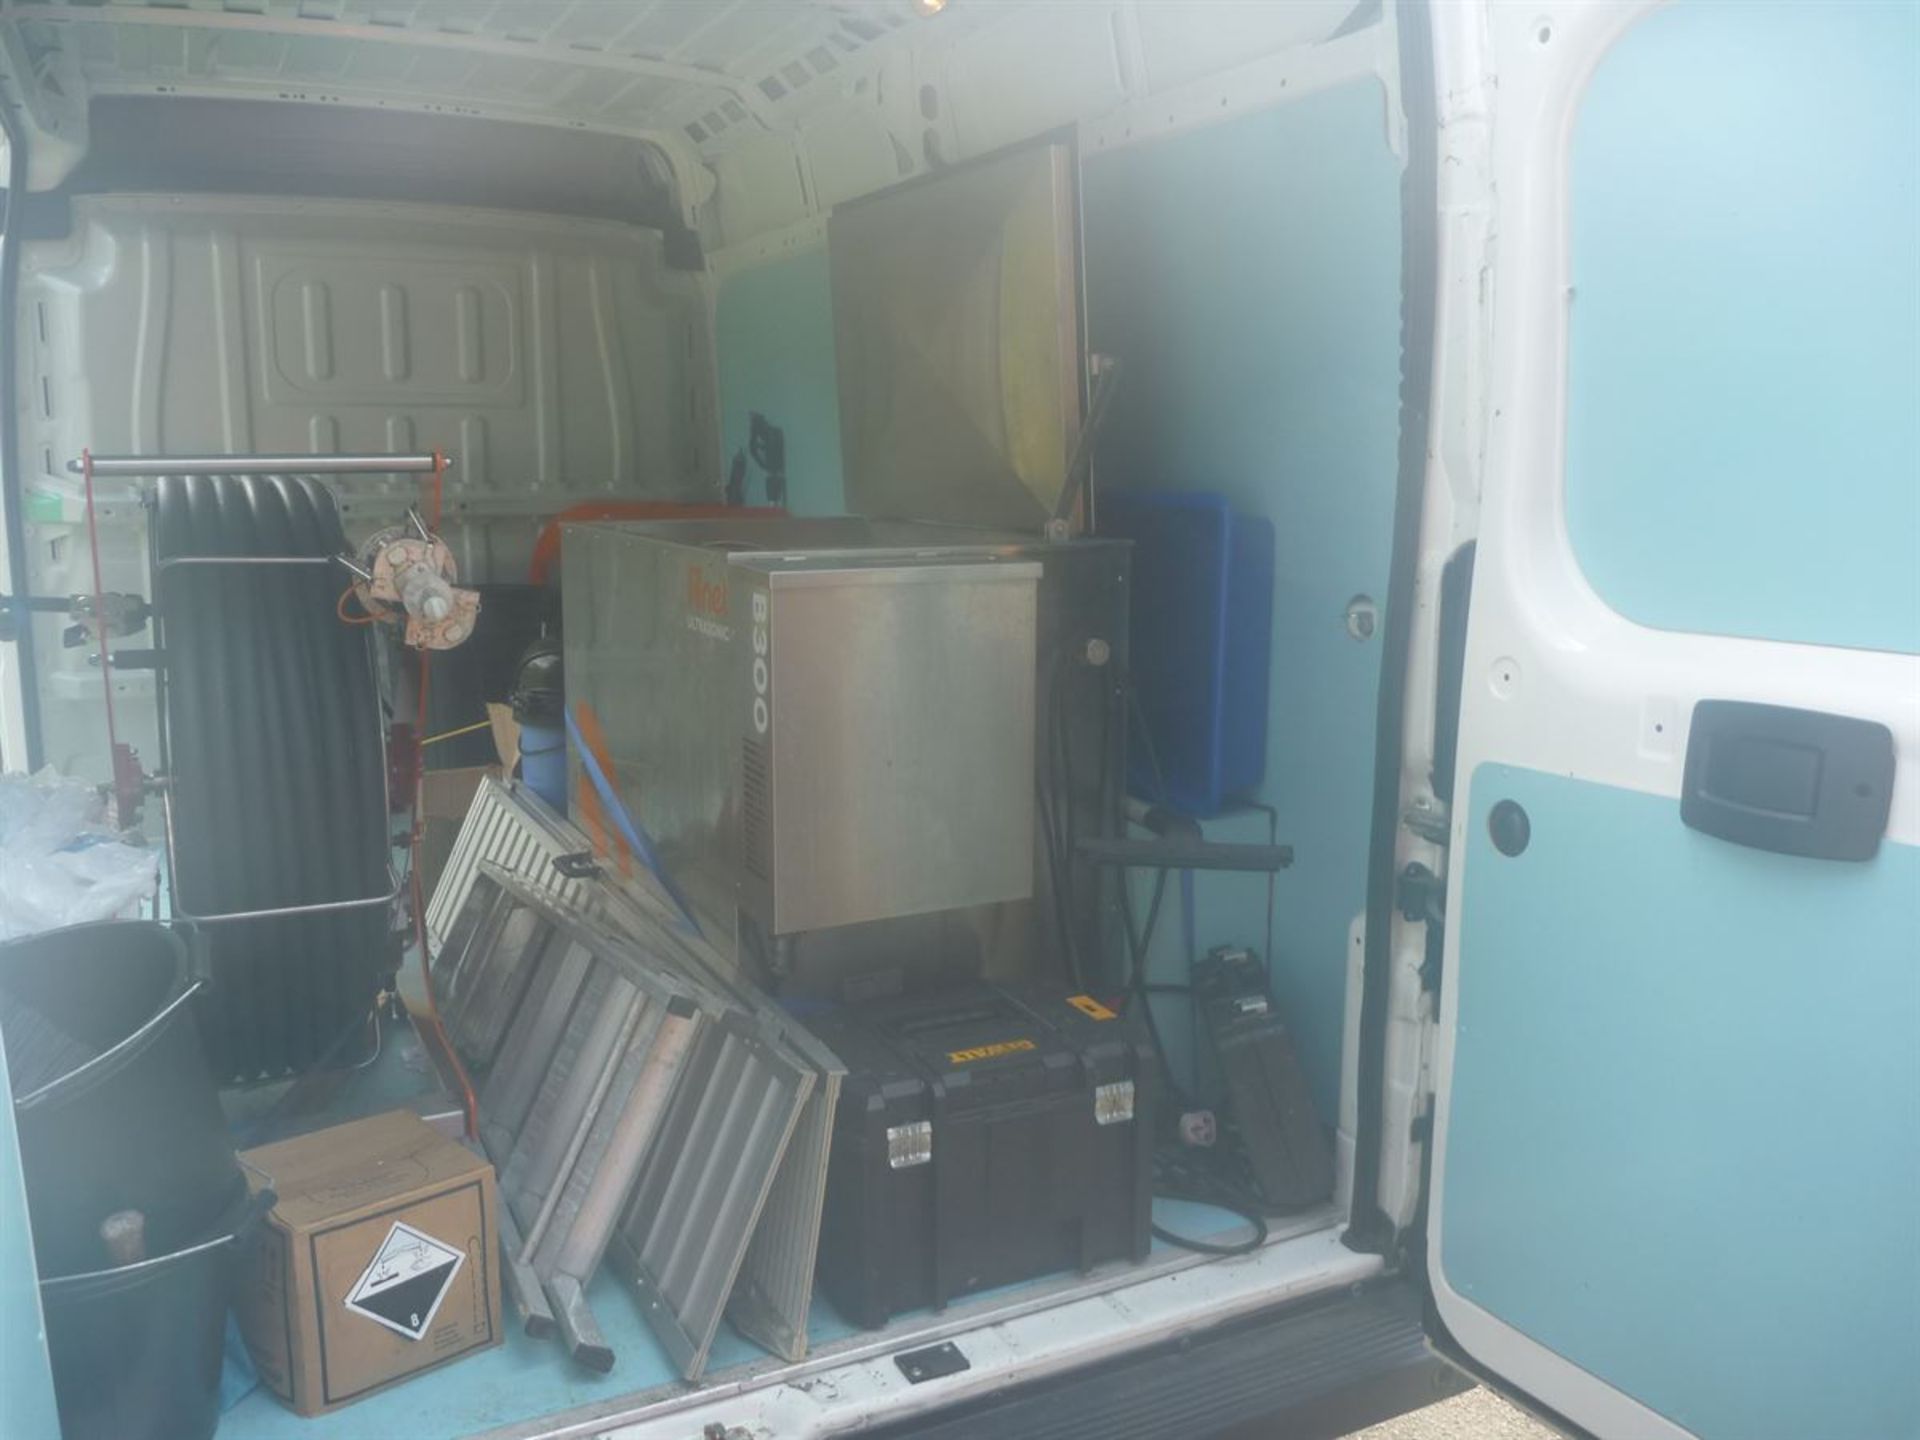 Full Assets of Small Cleaning Company go include Duct Cleaning Equipment and Citroen Relay Van - Image 9 of 12